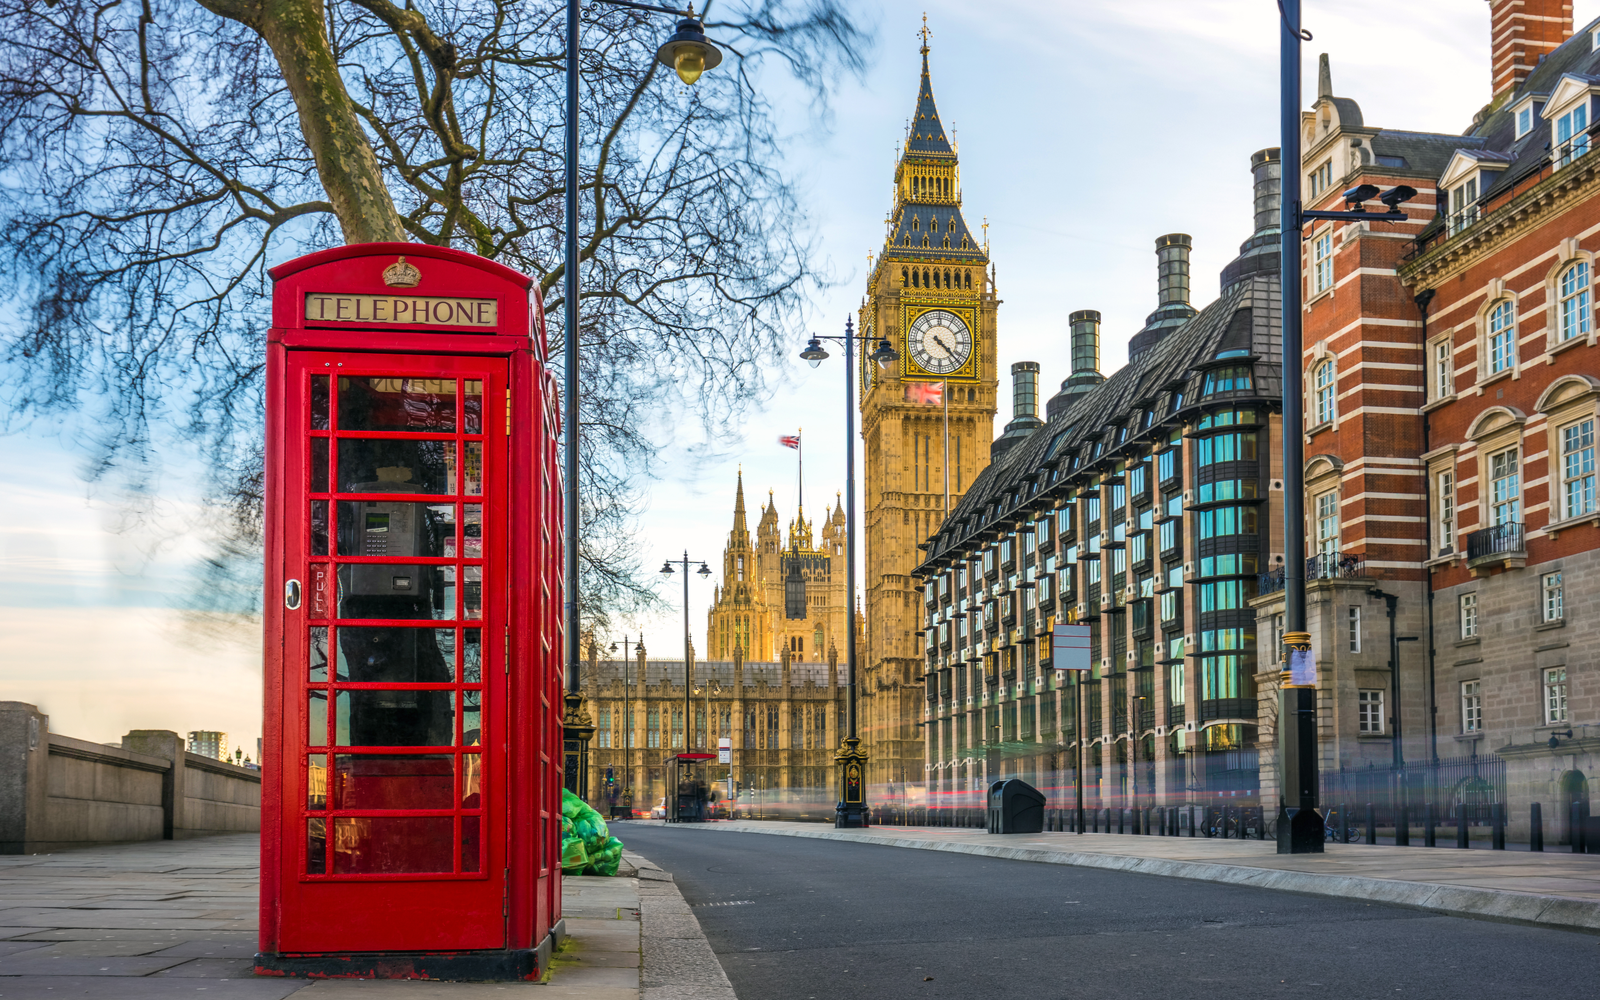 Iconic red telephone booth outside one of the historic buildings with Big Ben in the background during the best time to visit London